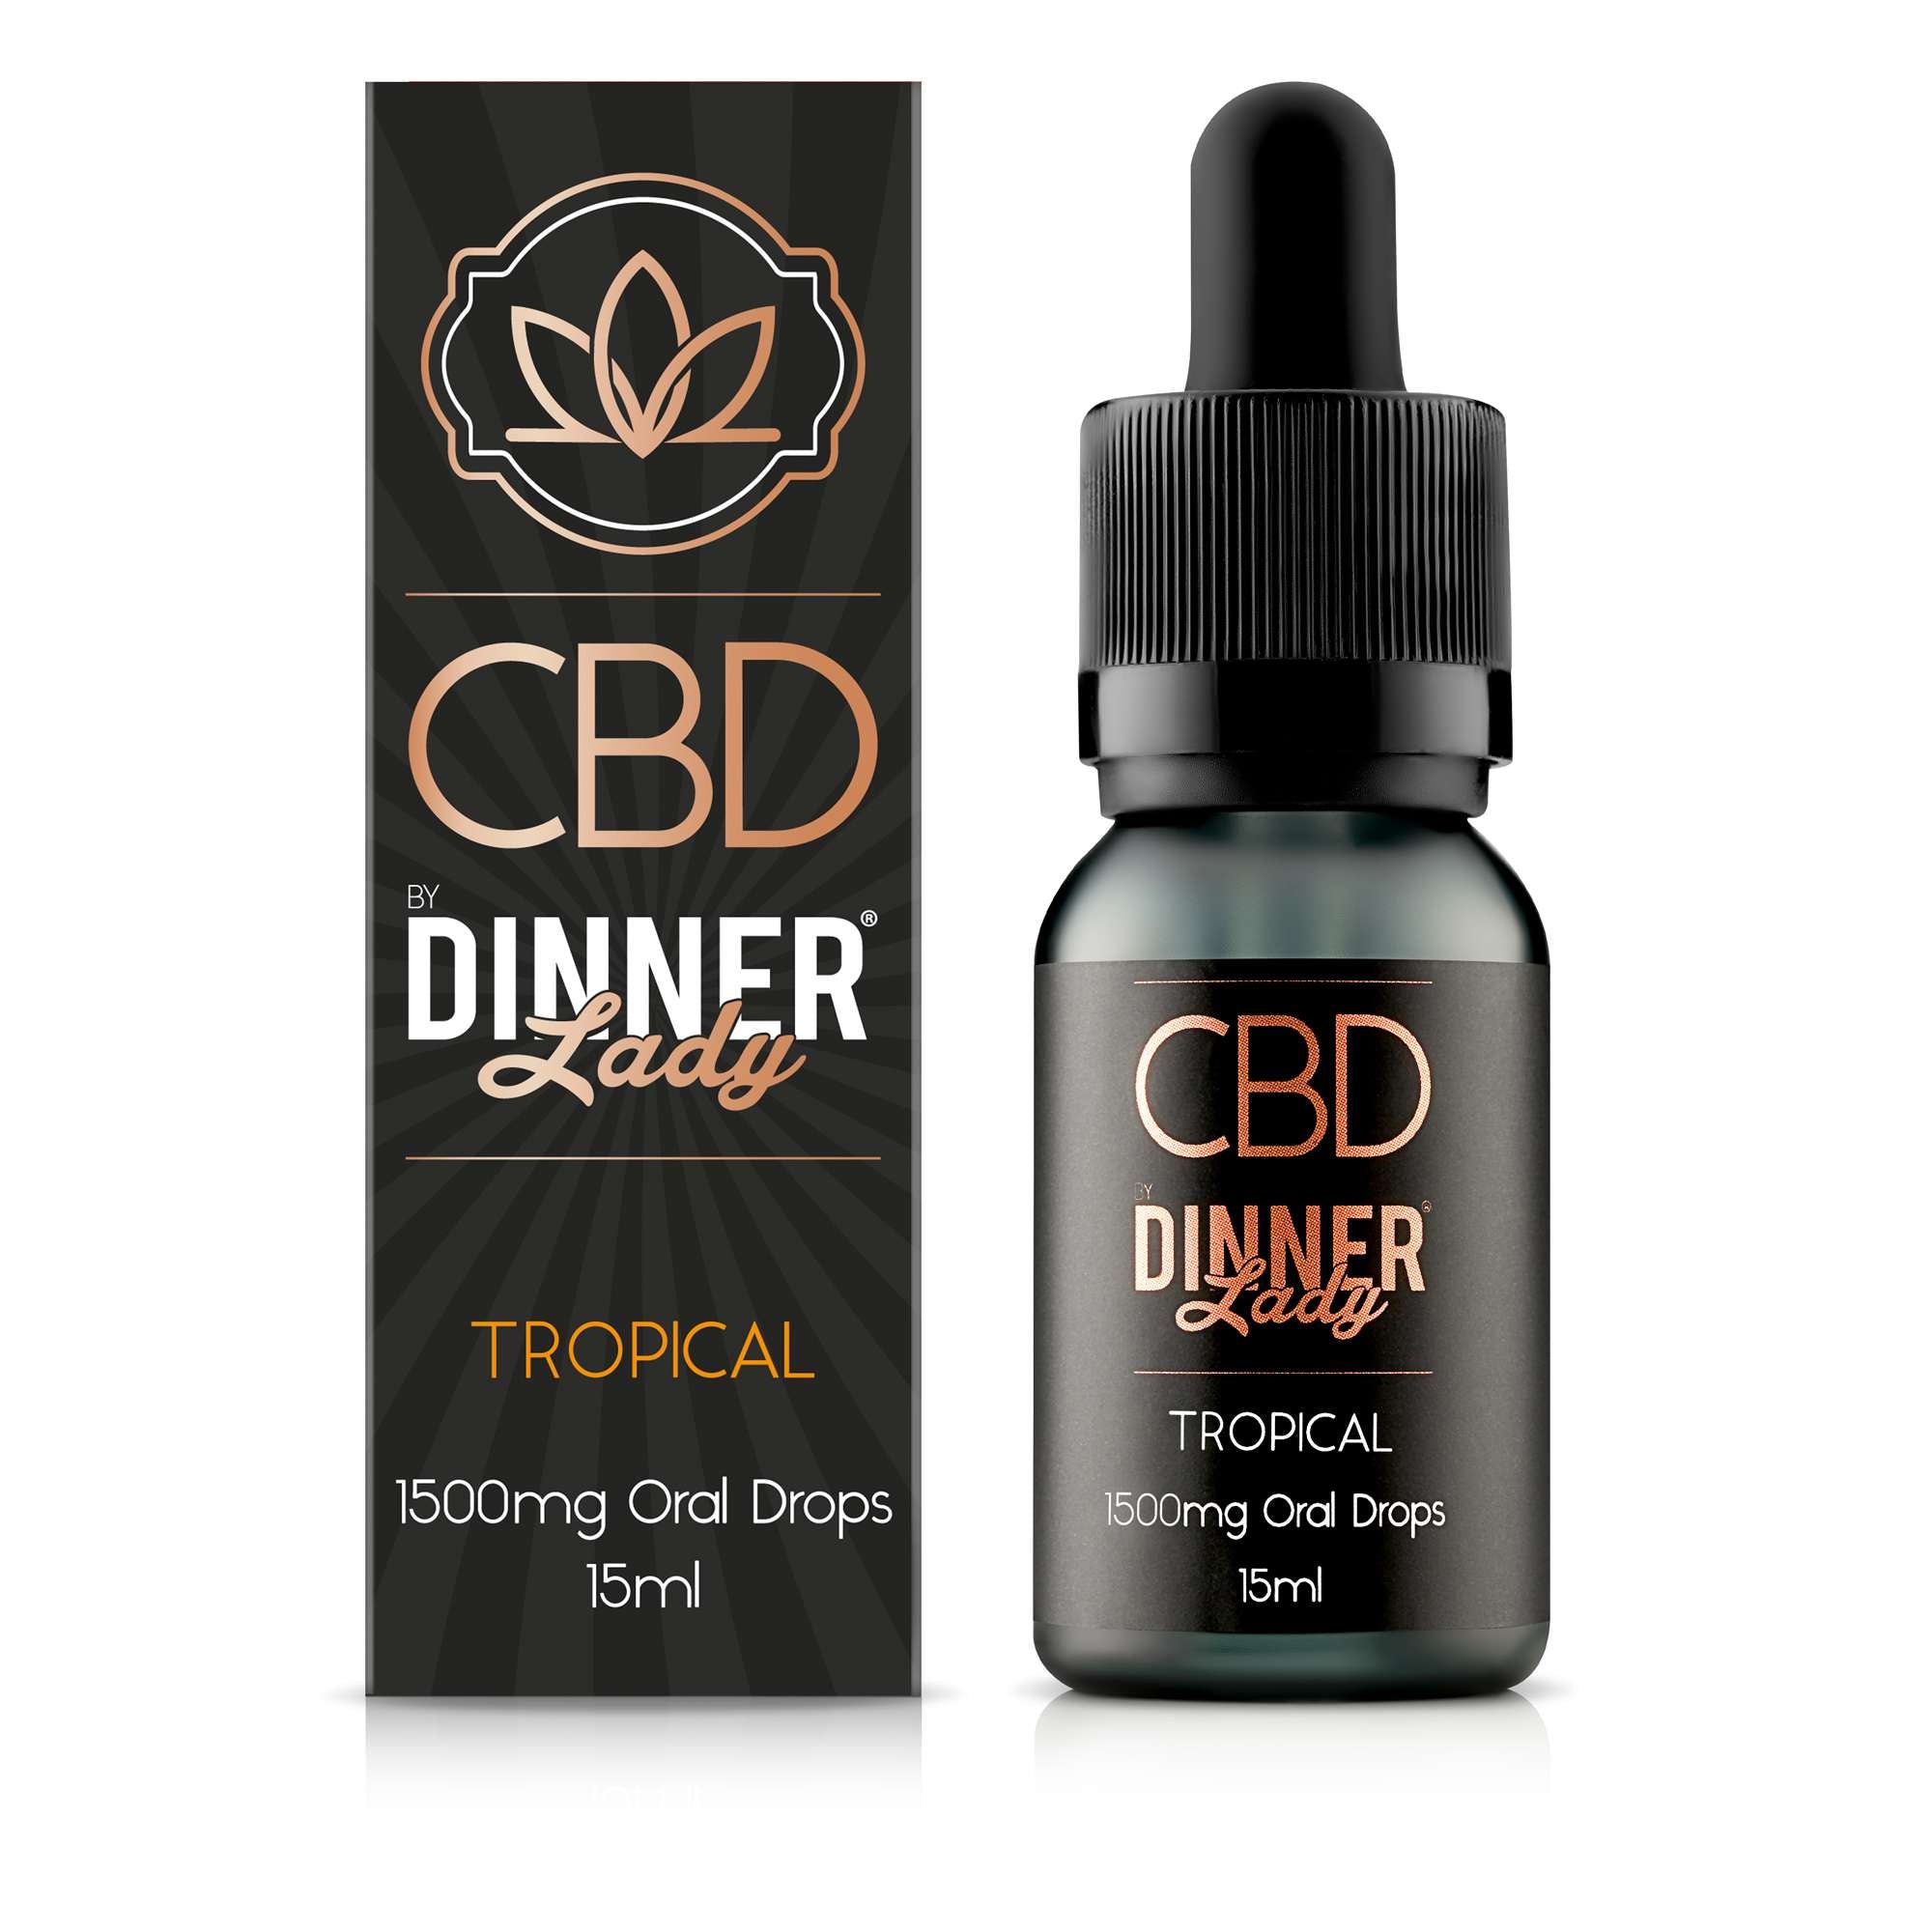 Dinner Lady CBD Tropical oral drops / tinctures - 15ml - 1500mg